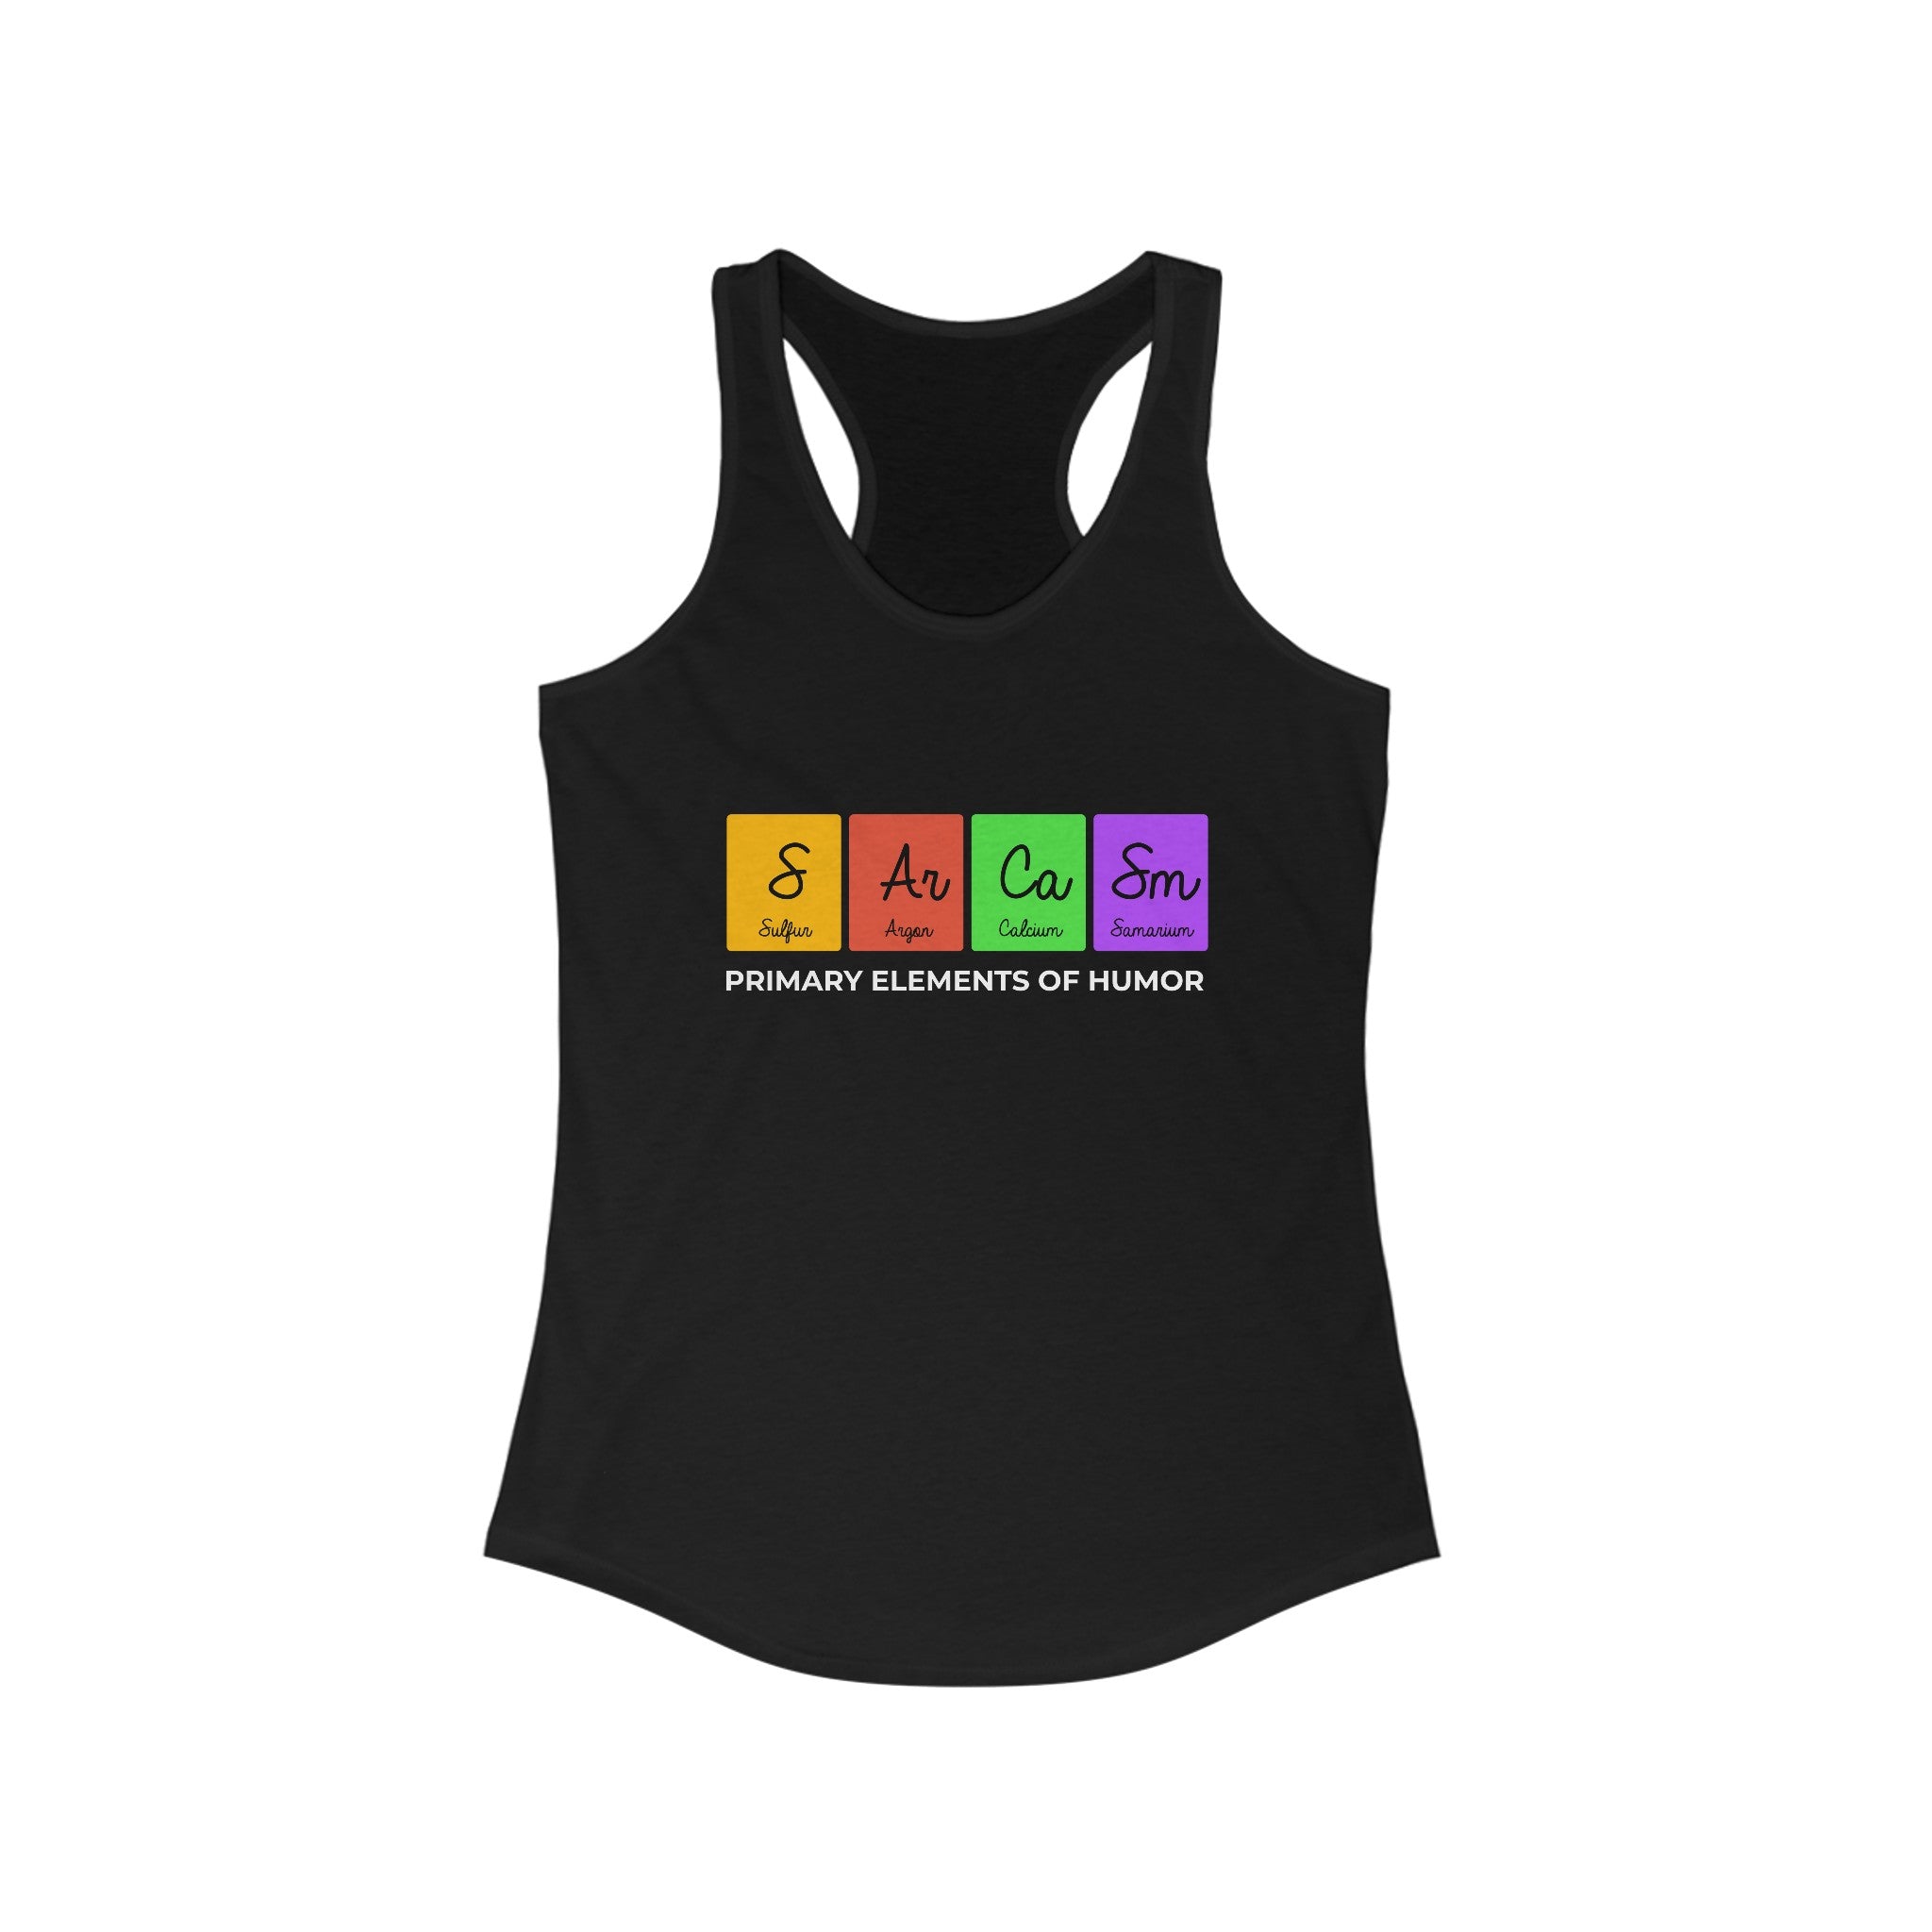 A lightweight, S-Ar-Ca-Sm - Women's Racerback Tank featuring a black design with periodic table elements spelling "Sarcasm" and the text "Primary Elements of Humor" below, perfect for an active life.